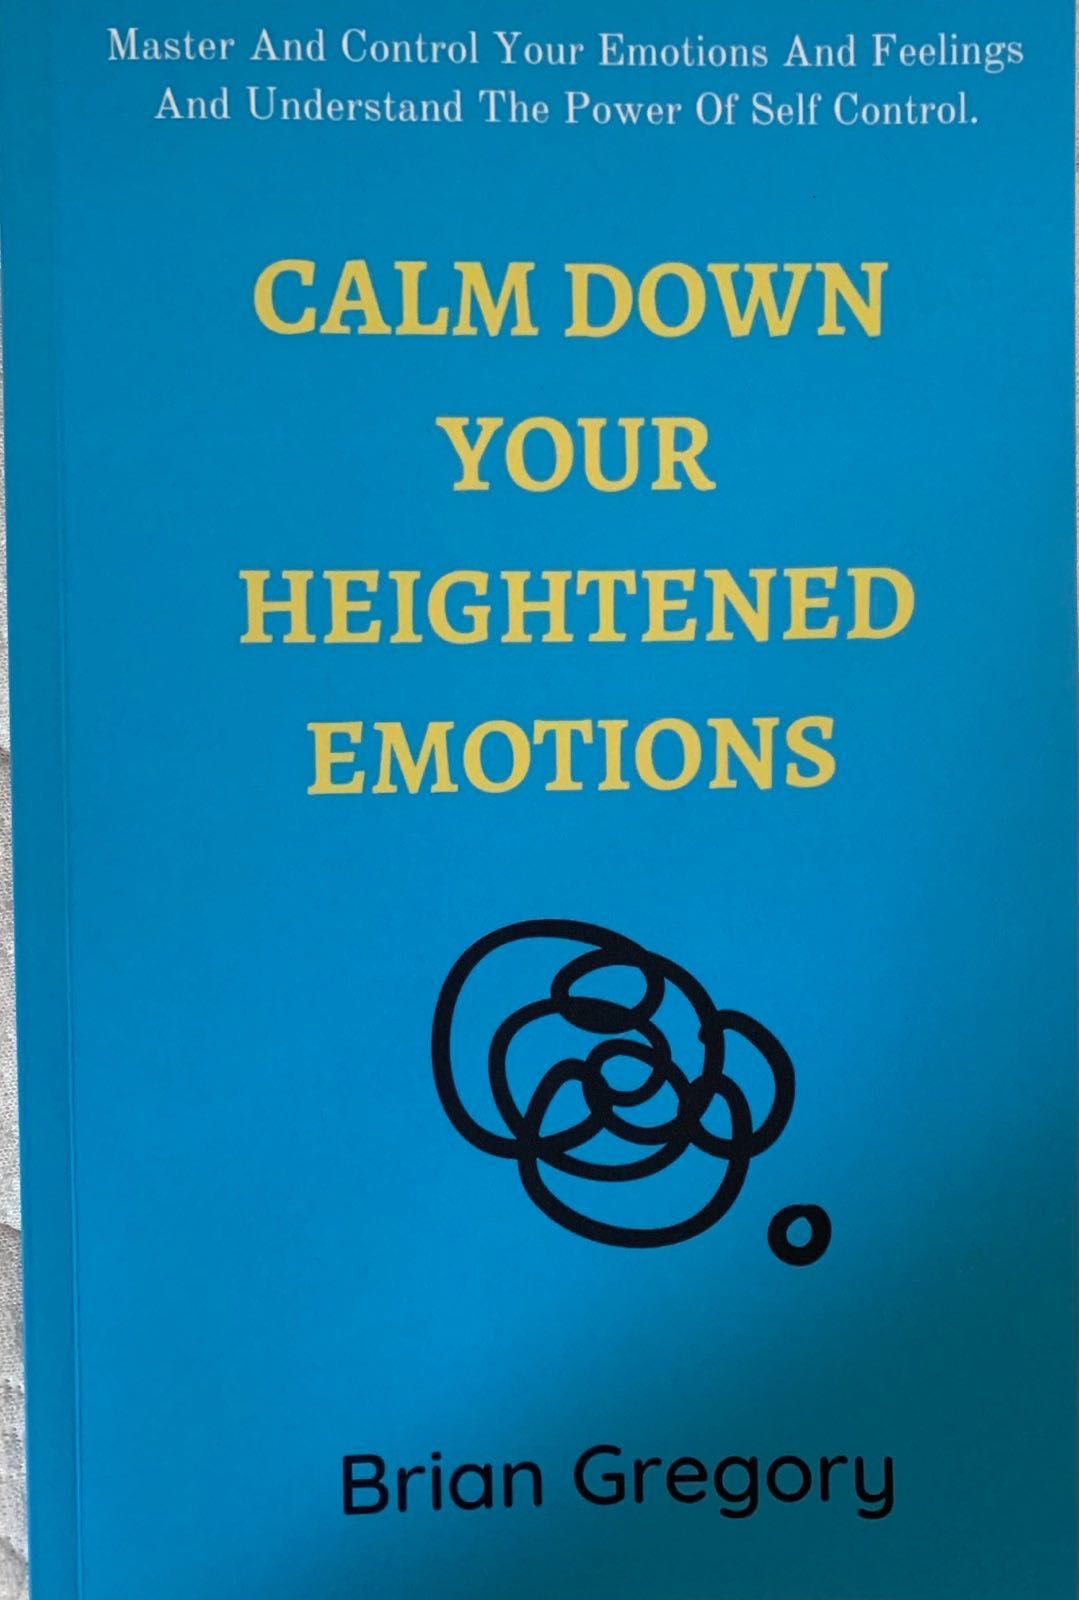 Calm Down Your Heightened Emotions Brian Gregory paperback NEW